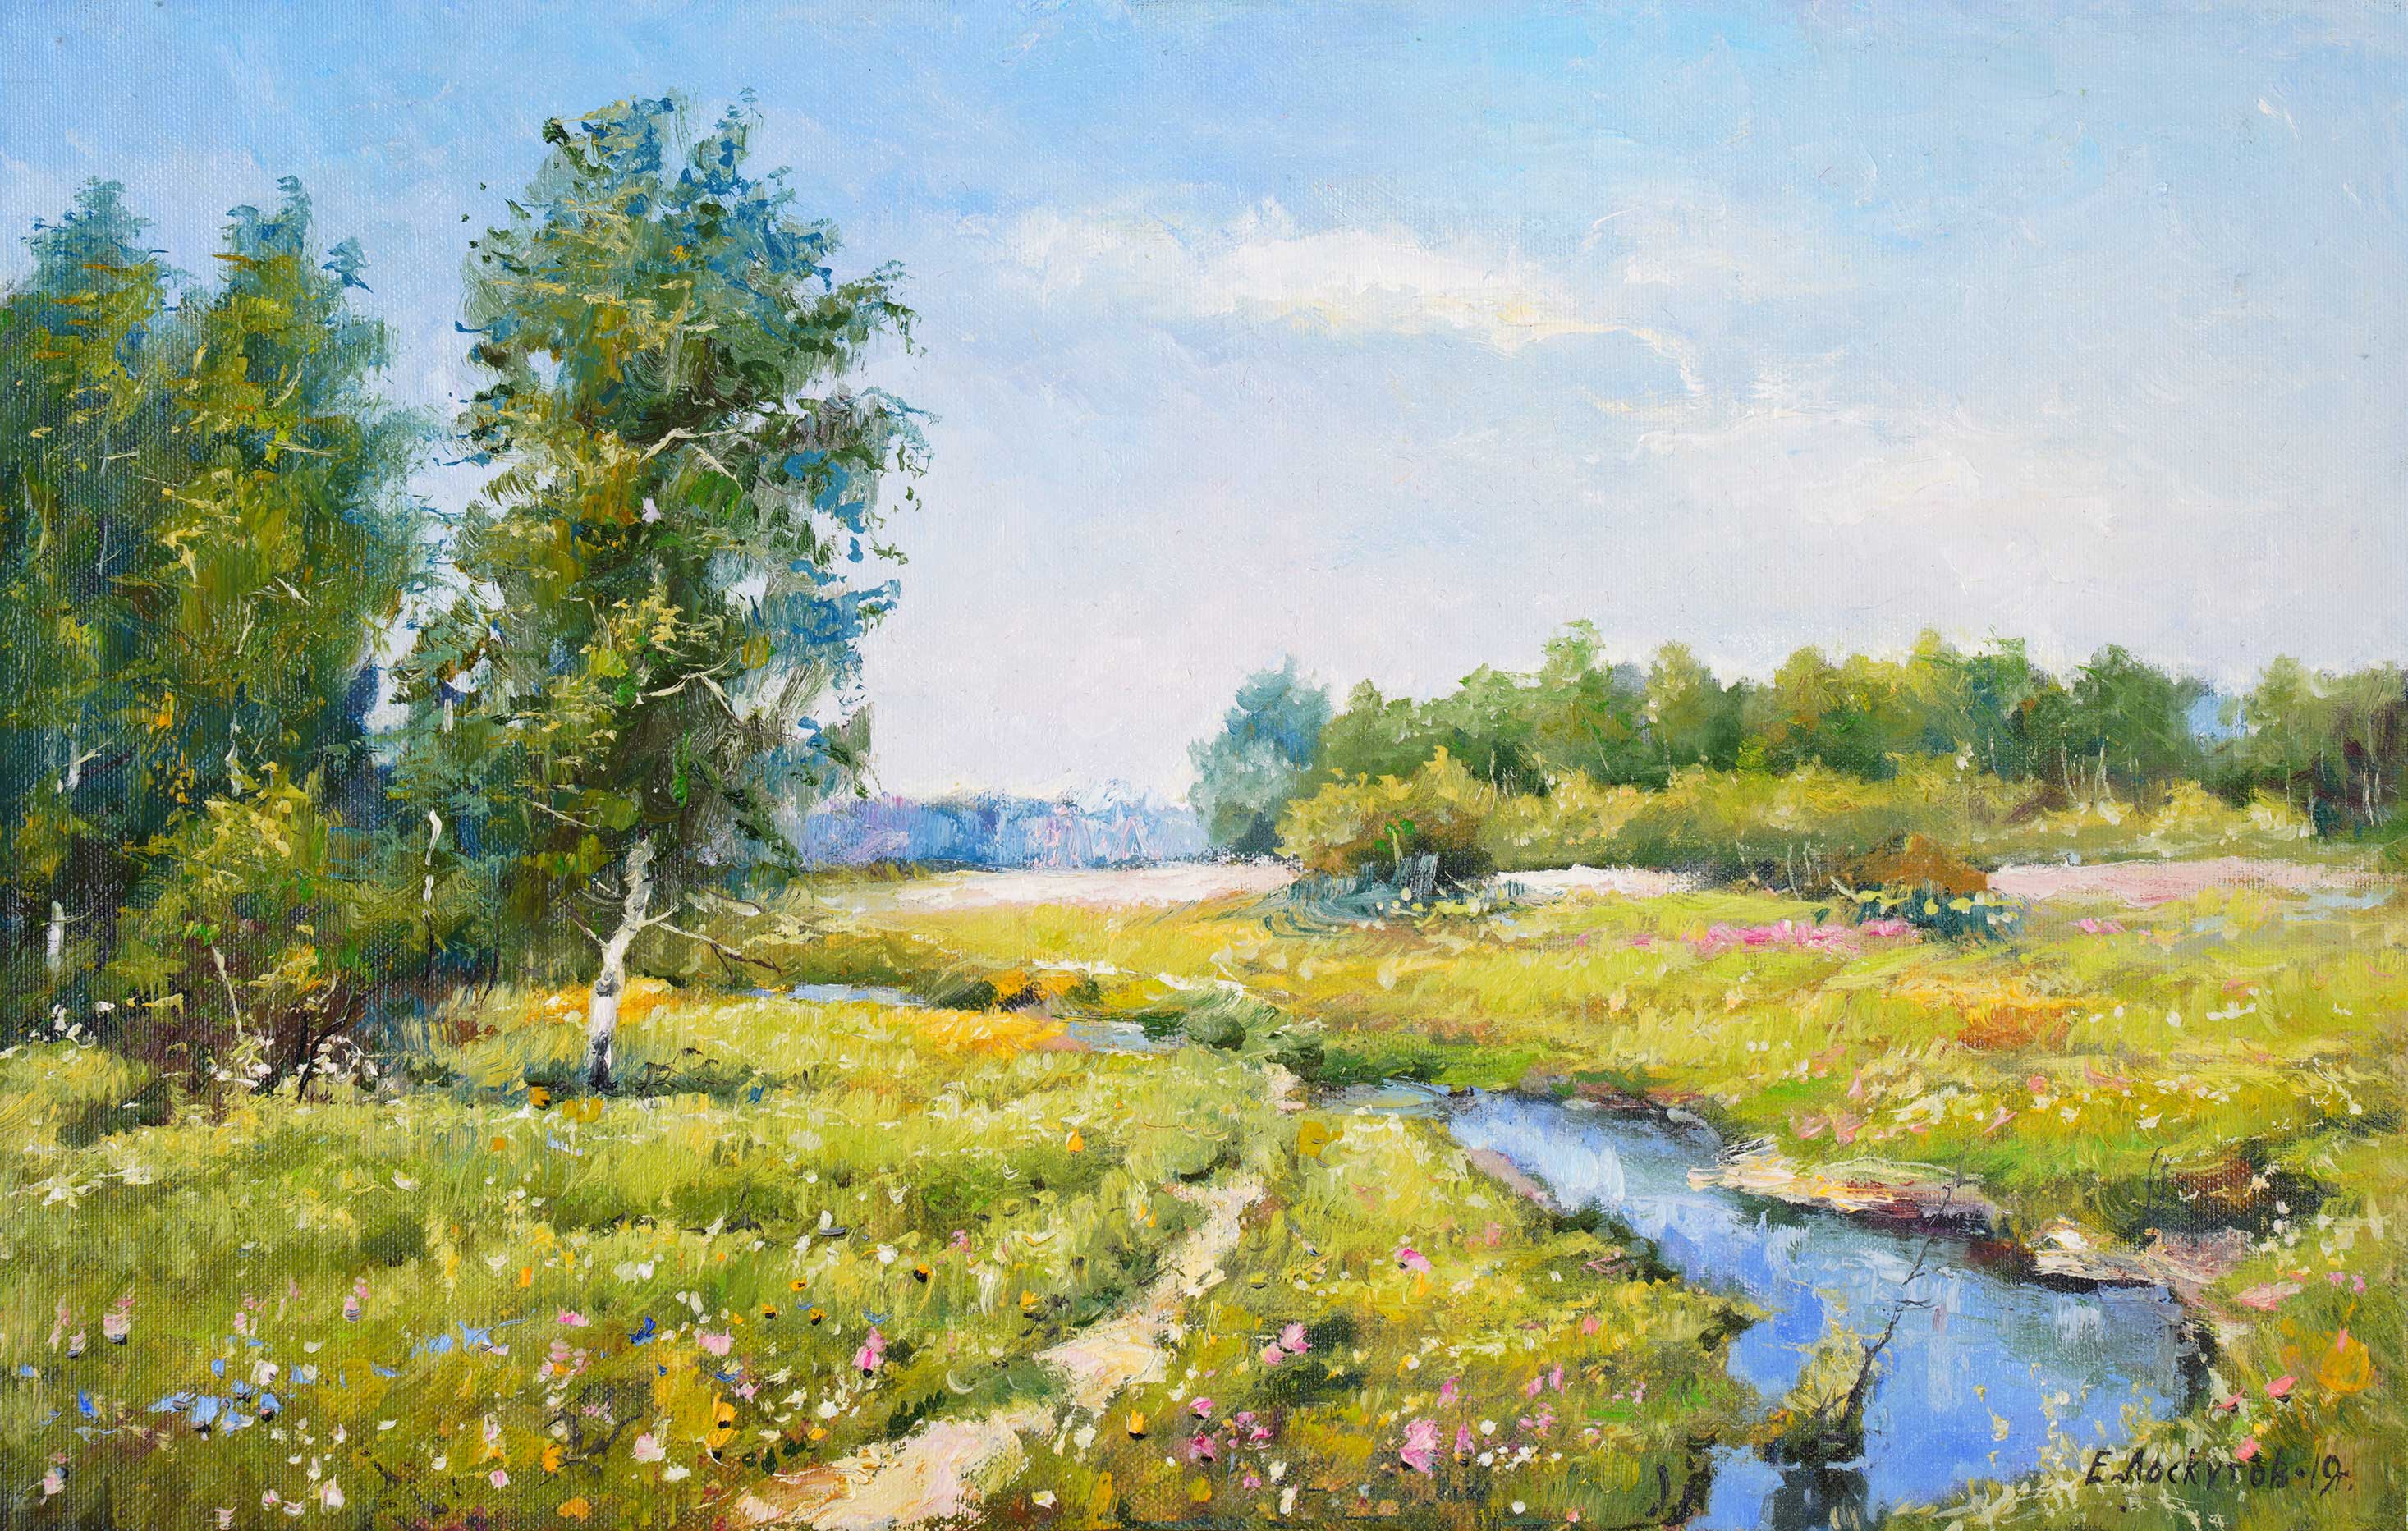 Smell the meadows - 1, Evgeny Loskutov, Buy the painting Oil